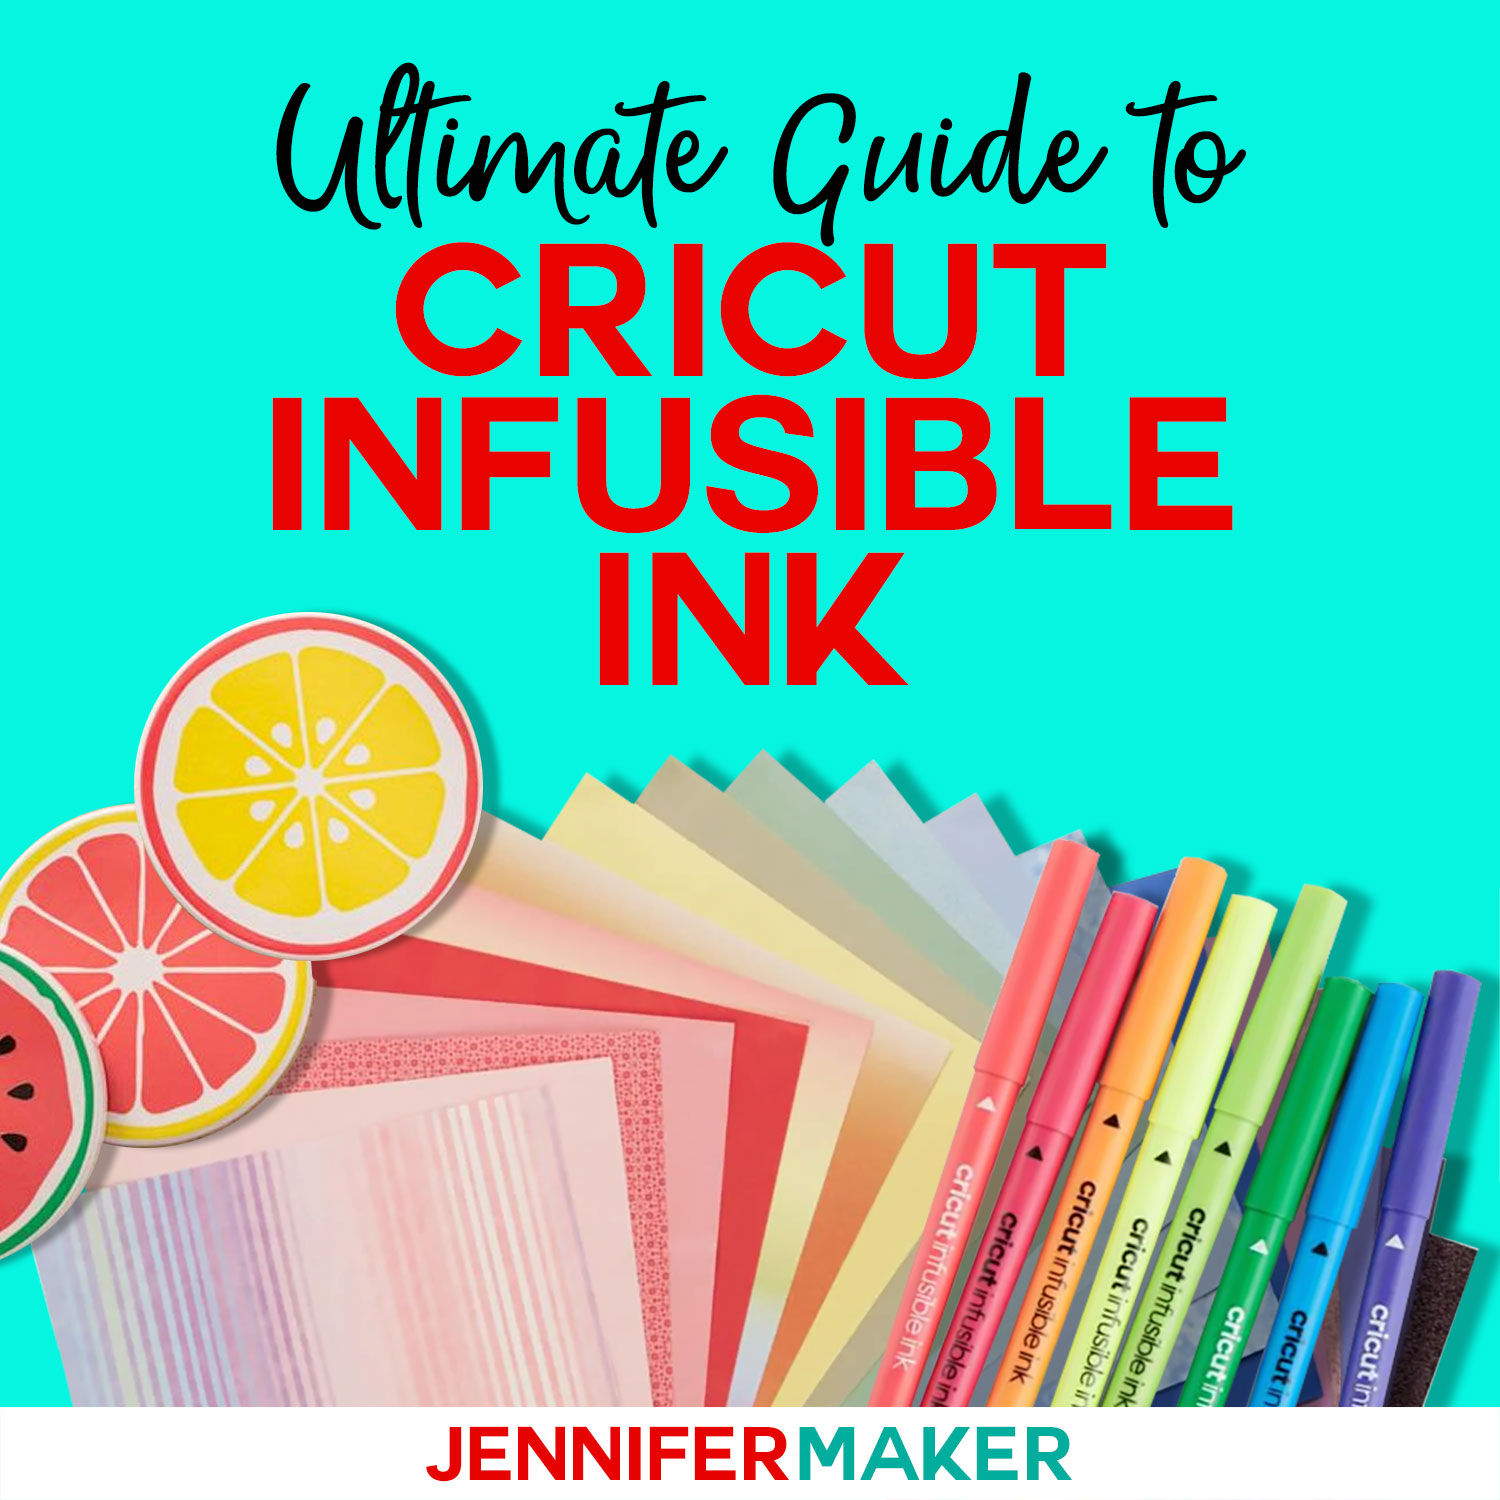 Cricut Infusible Ink How To Use Guide - Help & Instructions for making Cricut Infusible Ink Products #cricut #cricutmade #diy #handmade